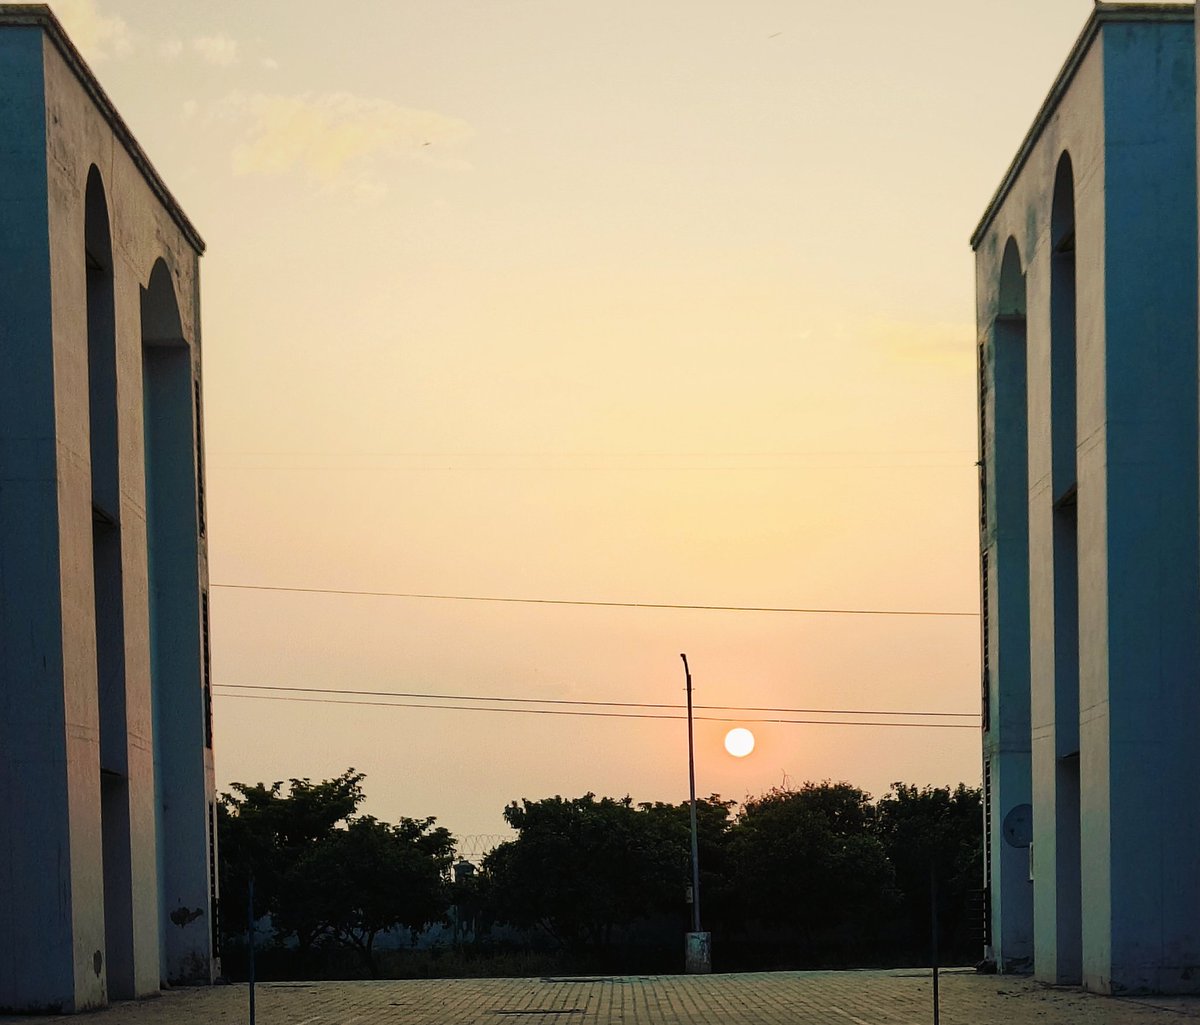 Blessed Sunset at #RGNUL campus! 
#SunsetViews 
#SunsetXVibes 
#NaturalBeauty